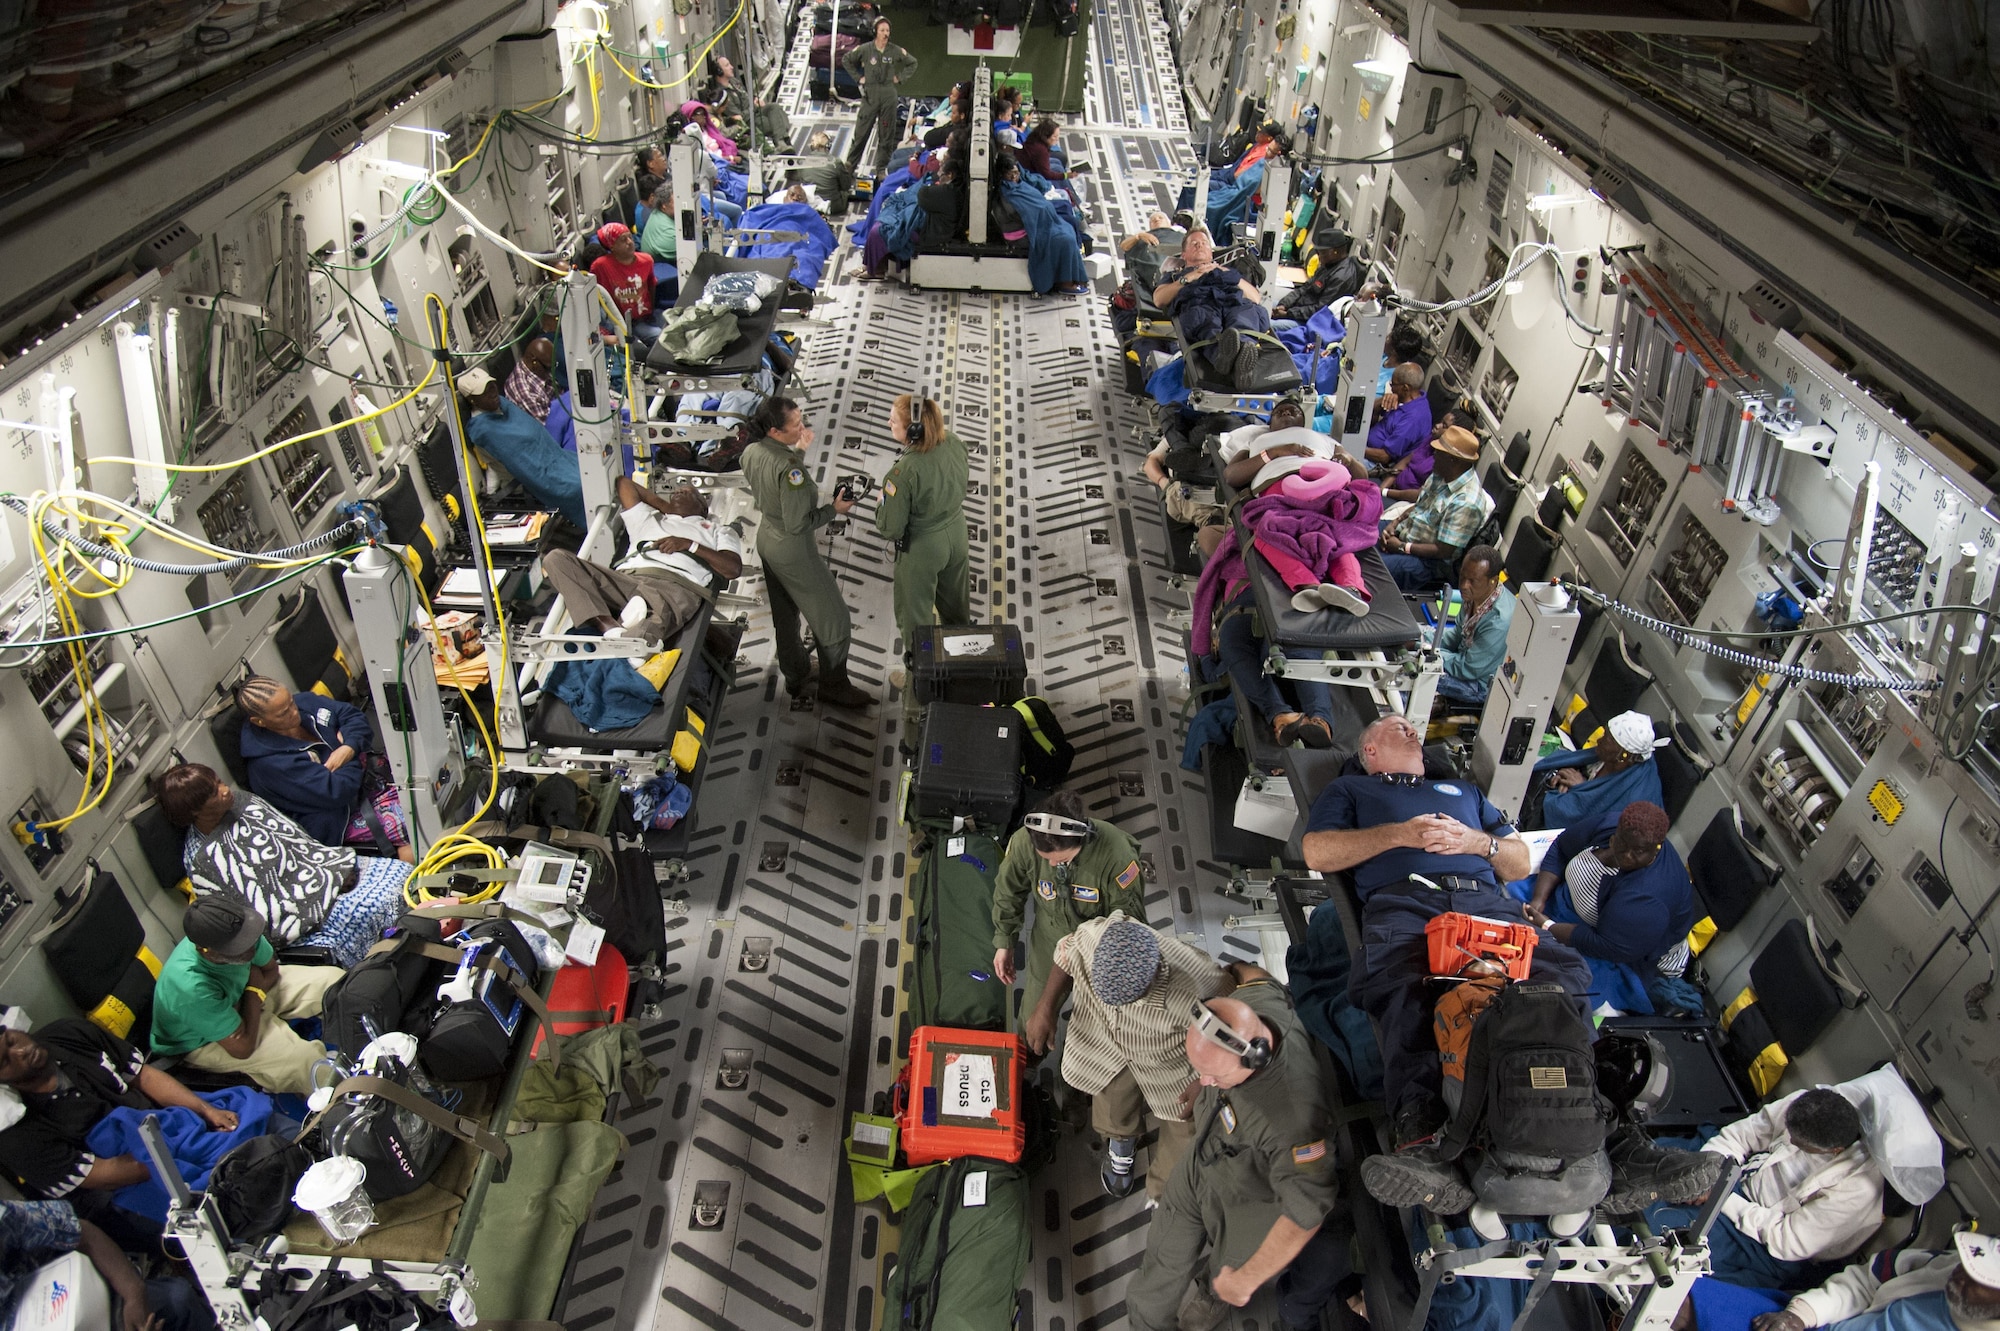 U.S. Air Force Reserve Airmen assigned to the 45th Aeromedical Evacuation Squadron assist patients aboard a C-17 Globemaster III in St. Croix, U.S. Virgin Islands, Sept. 24, 2017, as part of the relief efforts following Hurricane Maria. (U.S. Air Force photo by Tech. Sgt. Peter Dean)